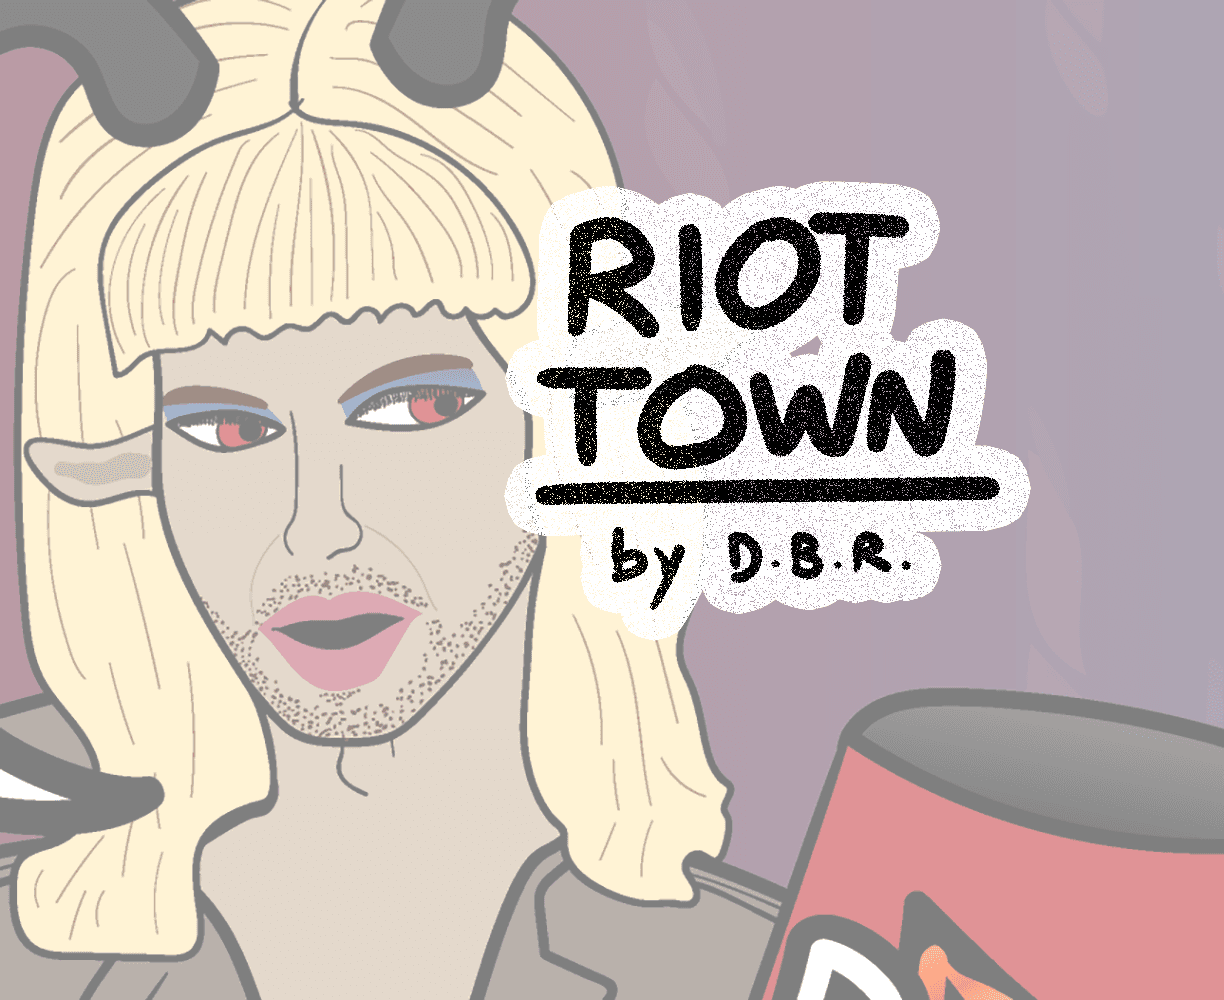 The cover art for the episode All That and a Bag of Chips from the comics series Riot Town, USA, which is number 48 in the series